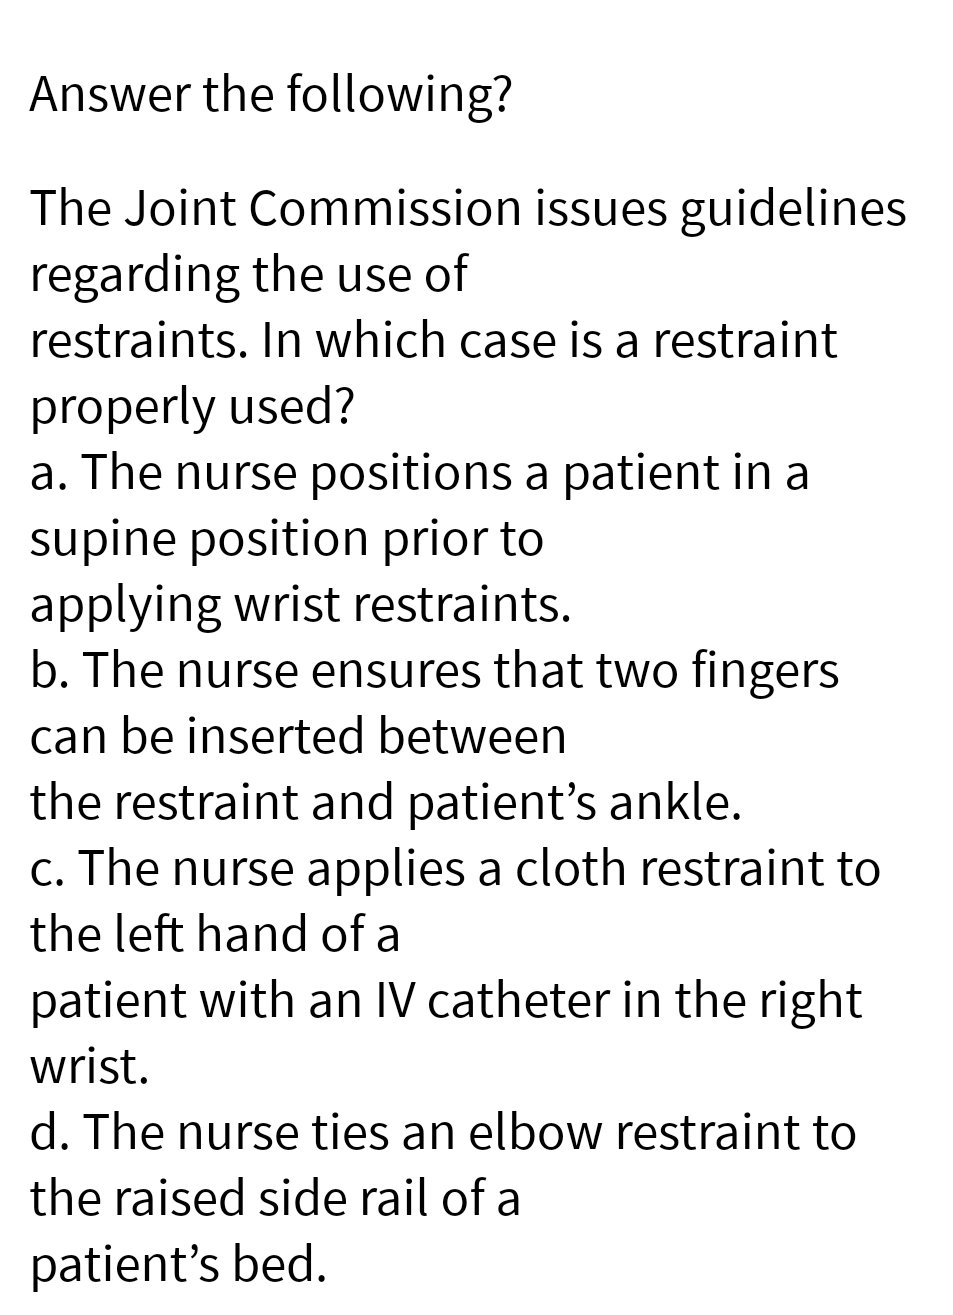 Answer the following?
The Joint Commission issues guidelines
regarding the use of
restraints. In which case is a restraint
properly used?
a. The nurse positions a patient in a
supine position prior to
applying wrist restraints.
b. The nurse ensures that two fingers
can be inserted between
the restraint and patient's ankle.
c. The nurse applies a cloth restraint to
the left hand of a
patient with an IV catheter in the right
wrist.
d. The nurse ties an elbow restraint to
the raised side rail of a
patient's bed.